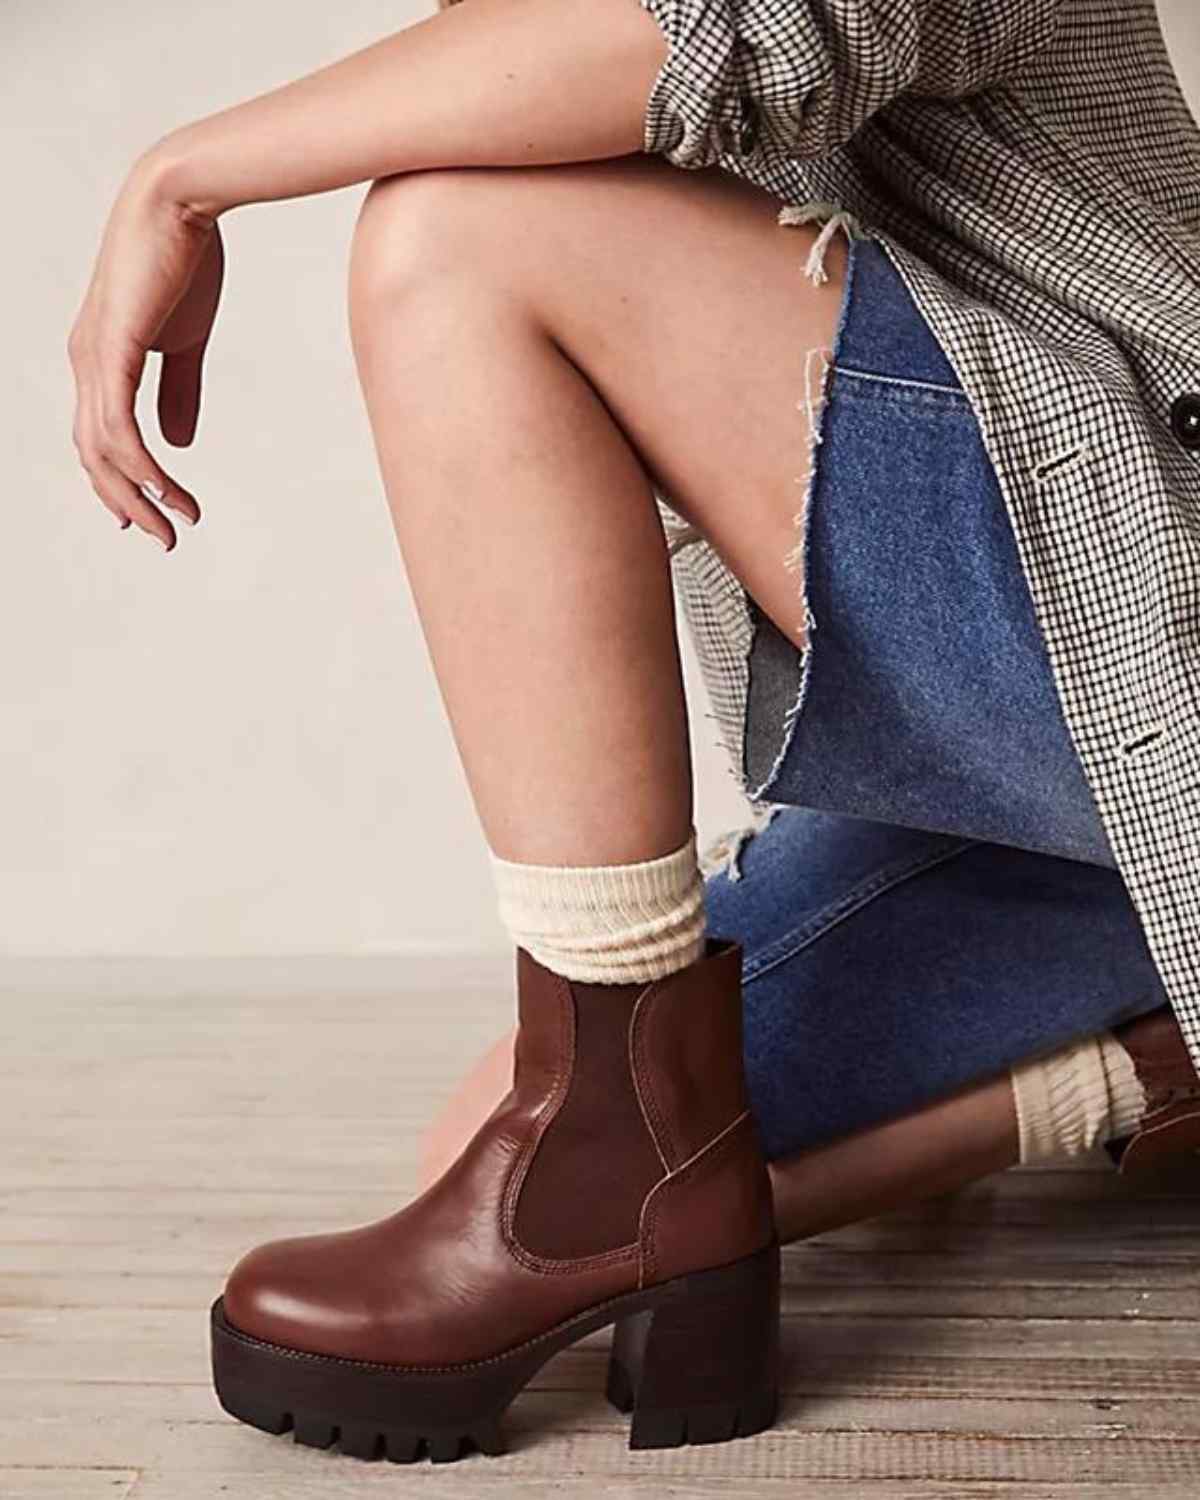 https://www.shoe-tease.com/wp-content/uploads/2022/11/Brown-Ankle-Boots-with-socks-crew.jpg